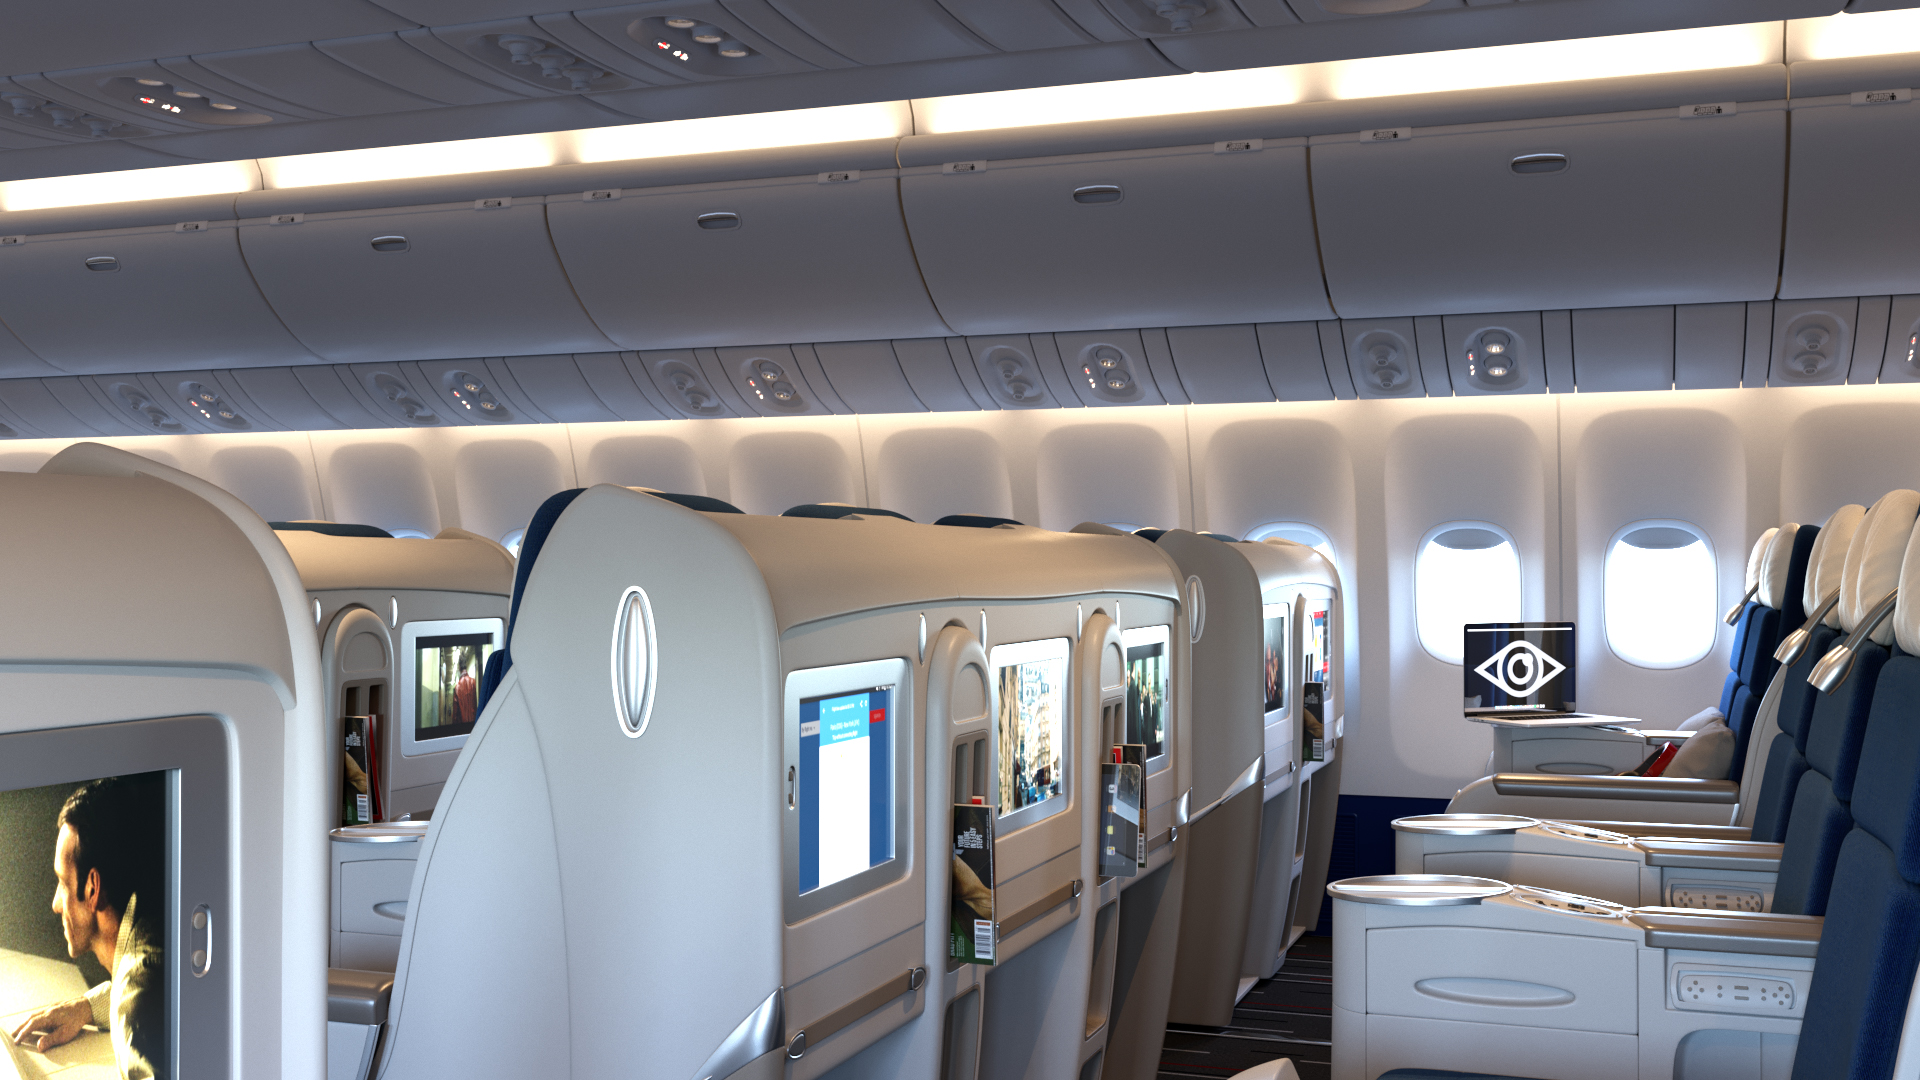 3d Visualisation Of A Boeing 777 Aircraft Interior Modeling And